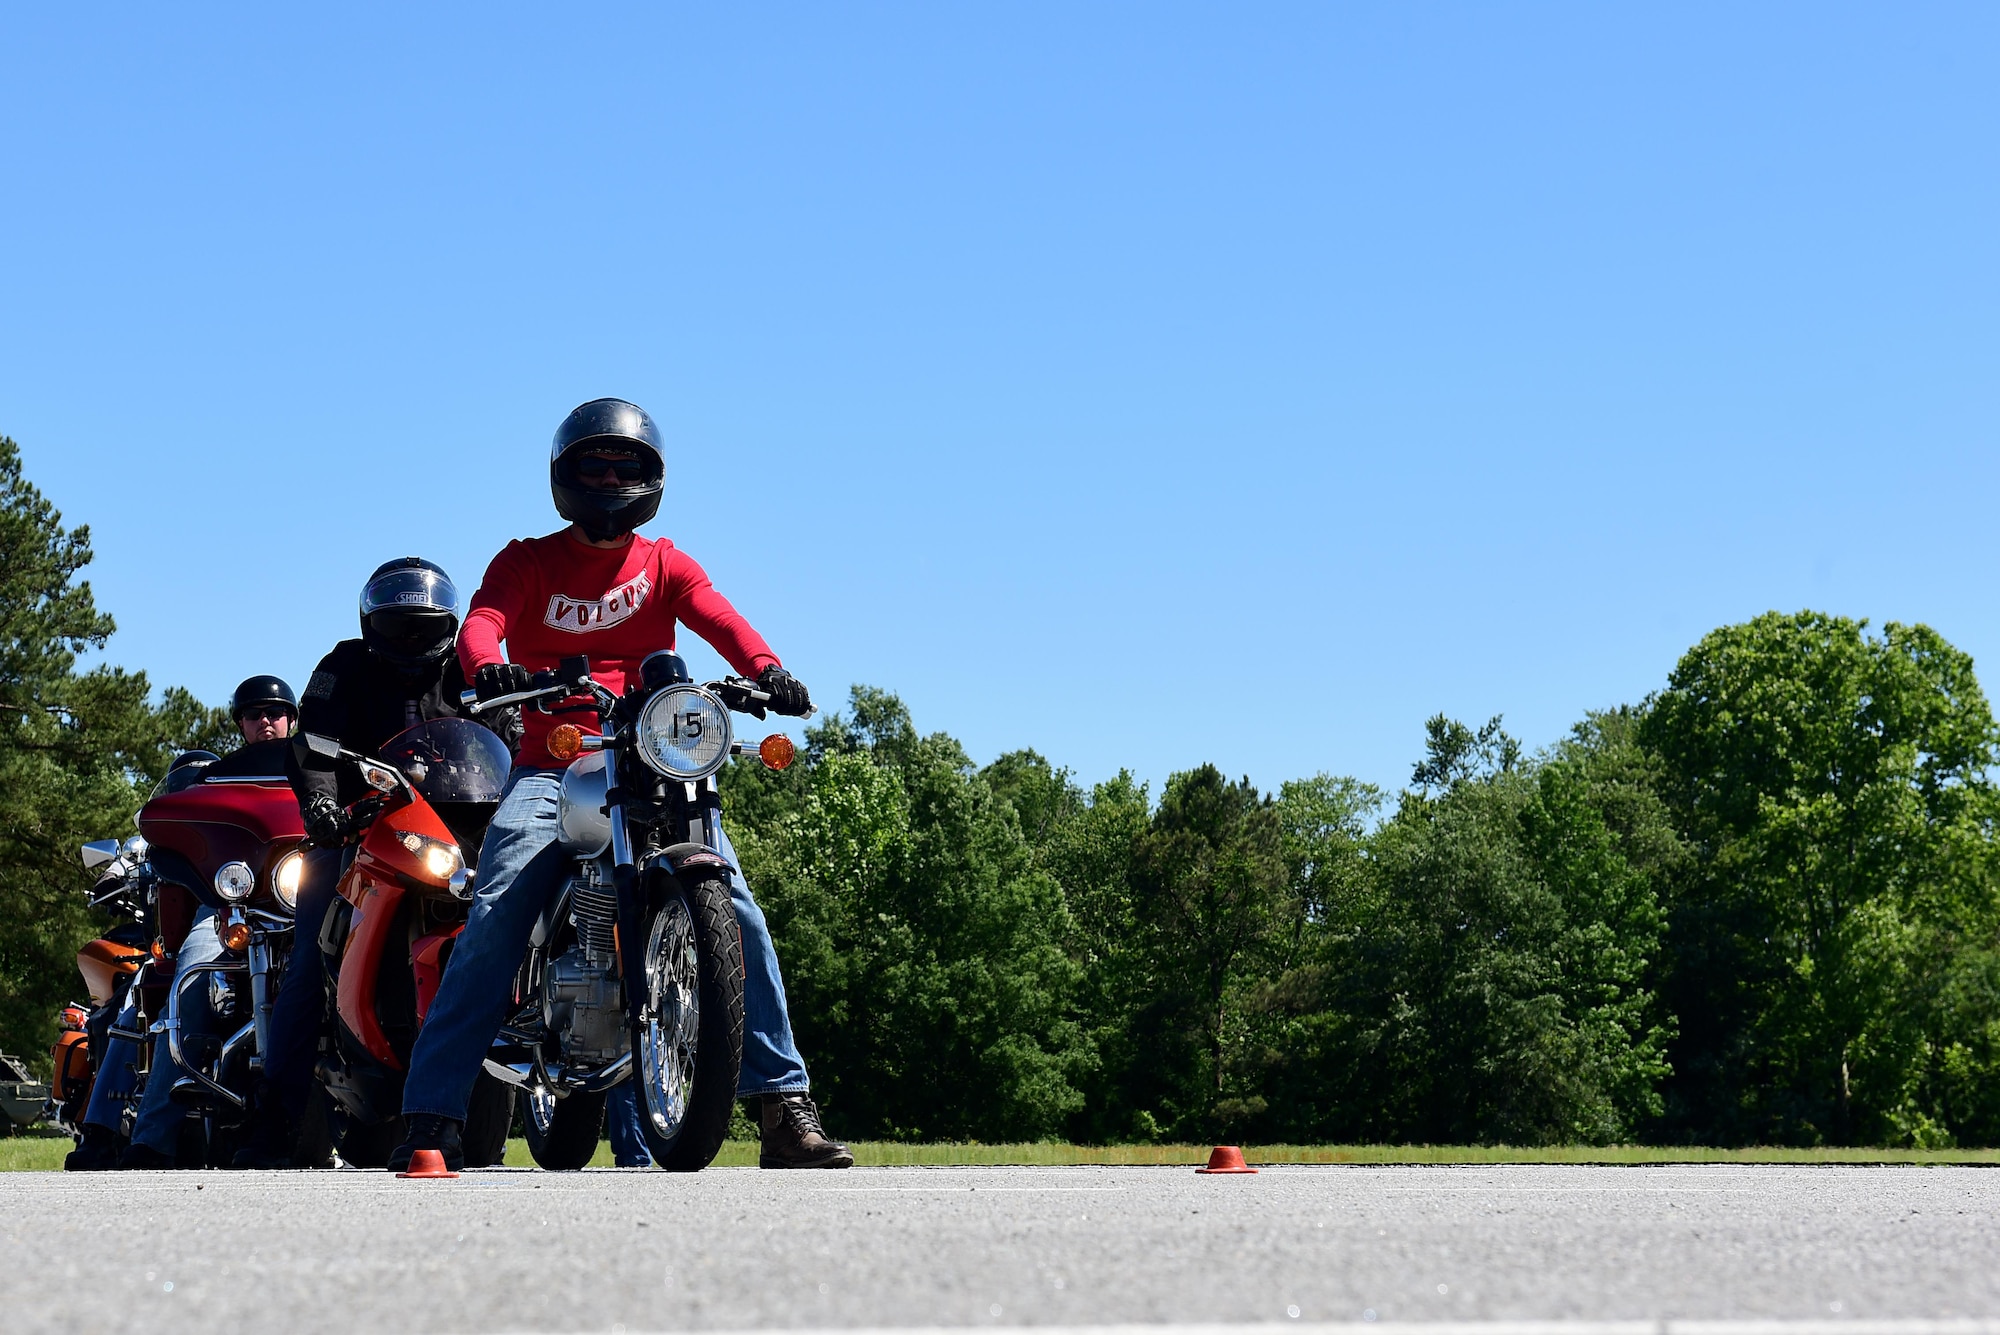 A group of Airmen prepare to ride around a test track as part of a motorcycle instructor course, May 2, 2017, at Seymour Johnson Air Force Base, North Carolina. The Airmen must show proficiency at teaching others in a classroom environment and on the driving range before being certified to teach the Basic Riders Course 2.  (U.S. Air Force photo by Airman 1st Class Kenneth Boyton)